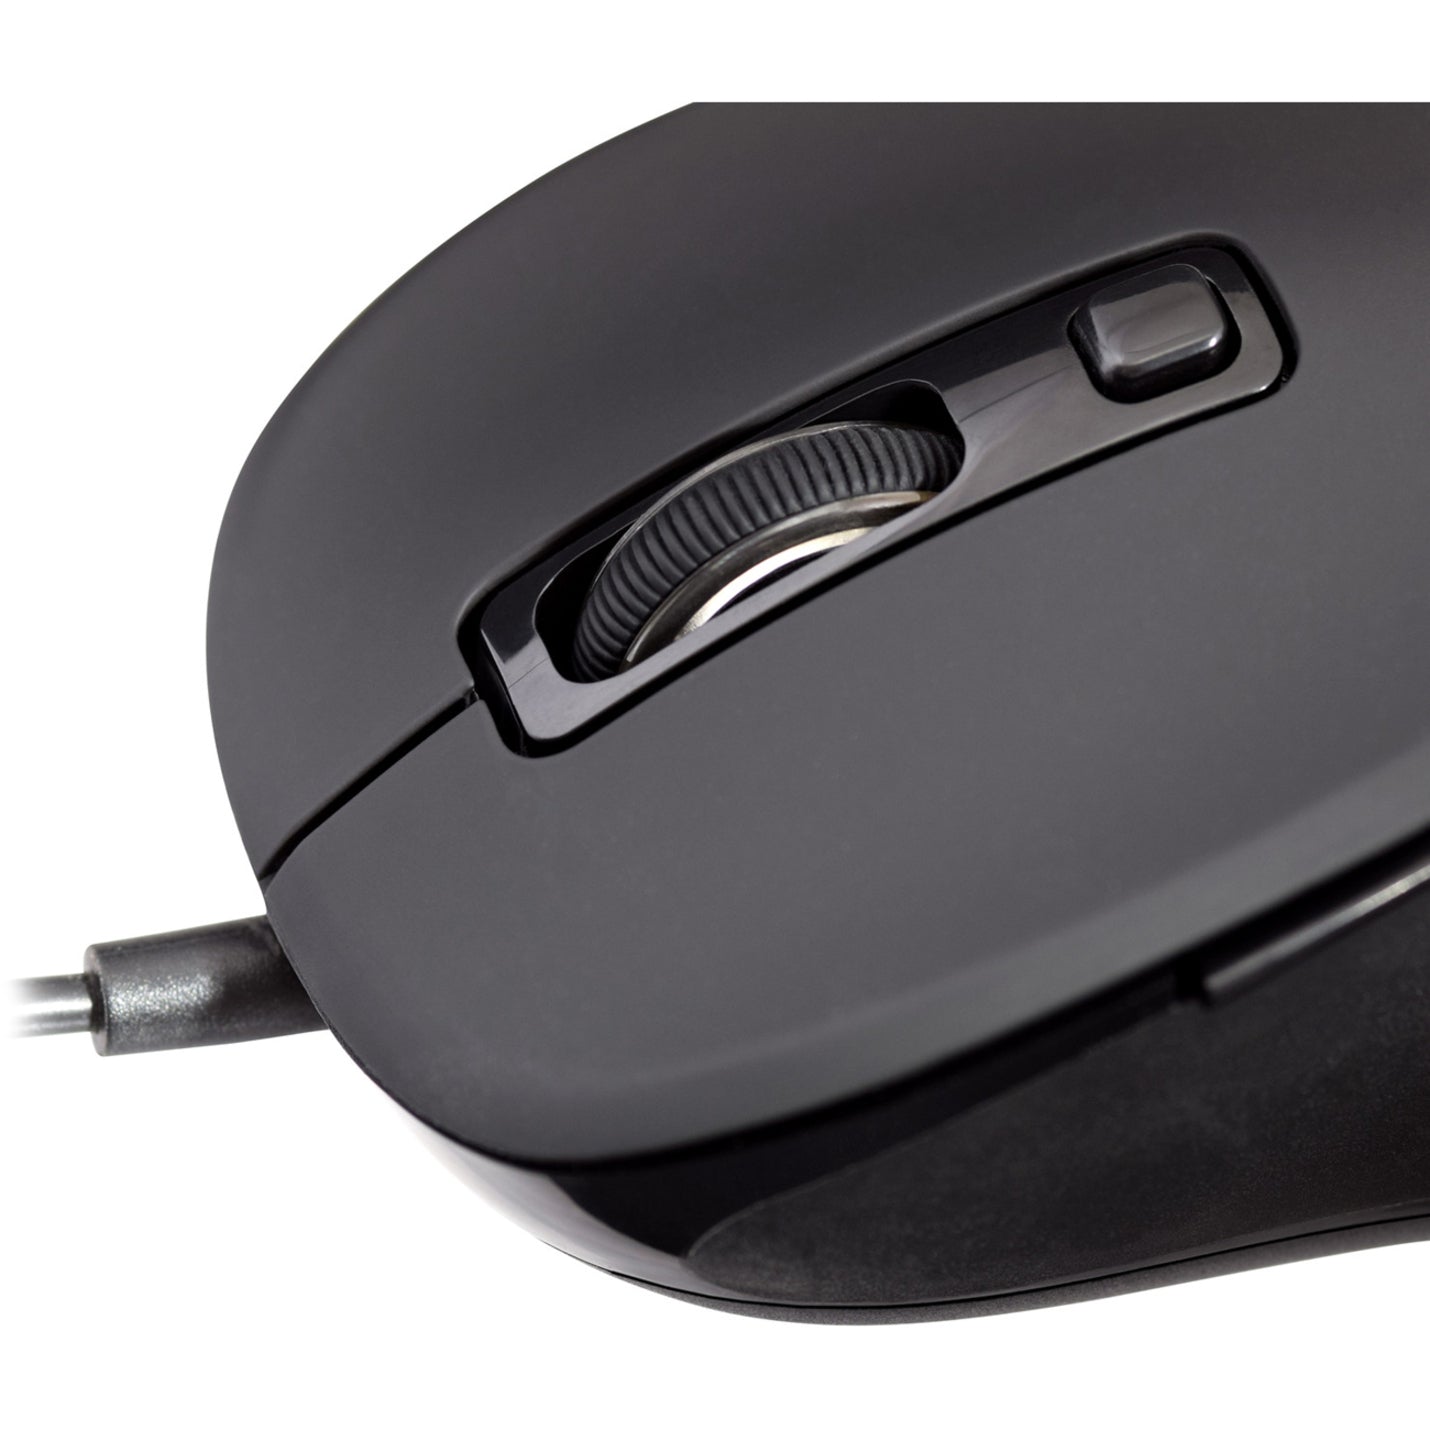 V7 MU300 PRO USB 6-Button Wired Mouse with Adjustable DPI - Black, Ergonomic Fit, 1600 DPI, 2-Year Warranty [Discontinued]